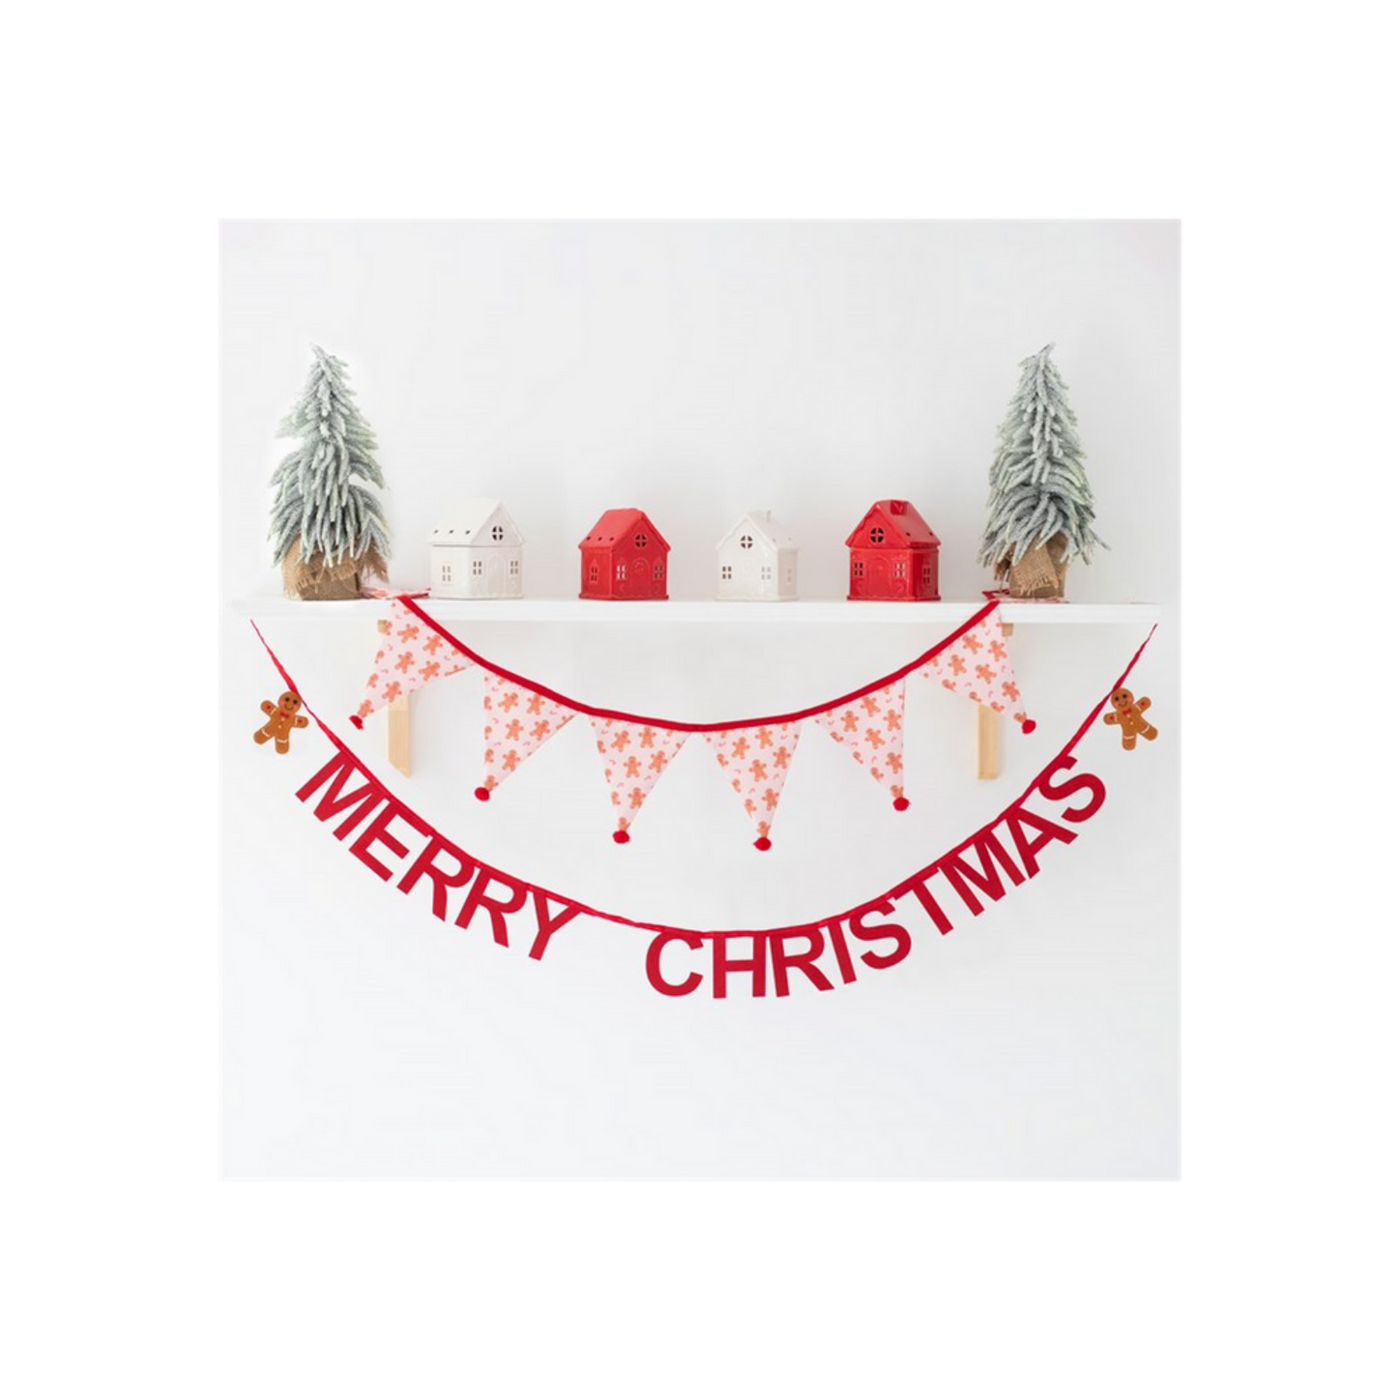 Merry Christmas Decorative Gingerbread Bunting.